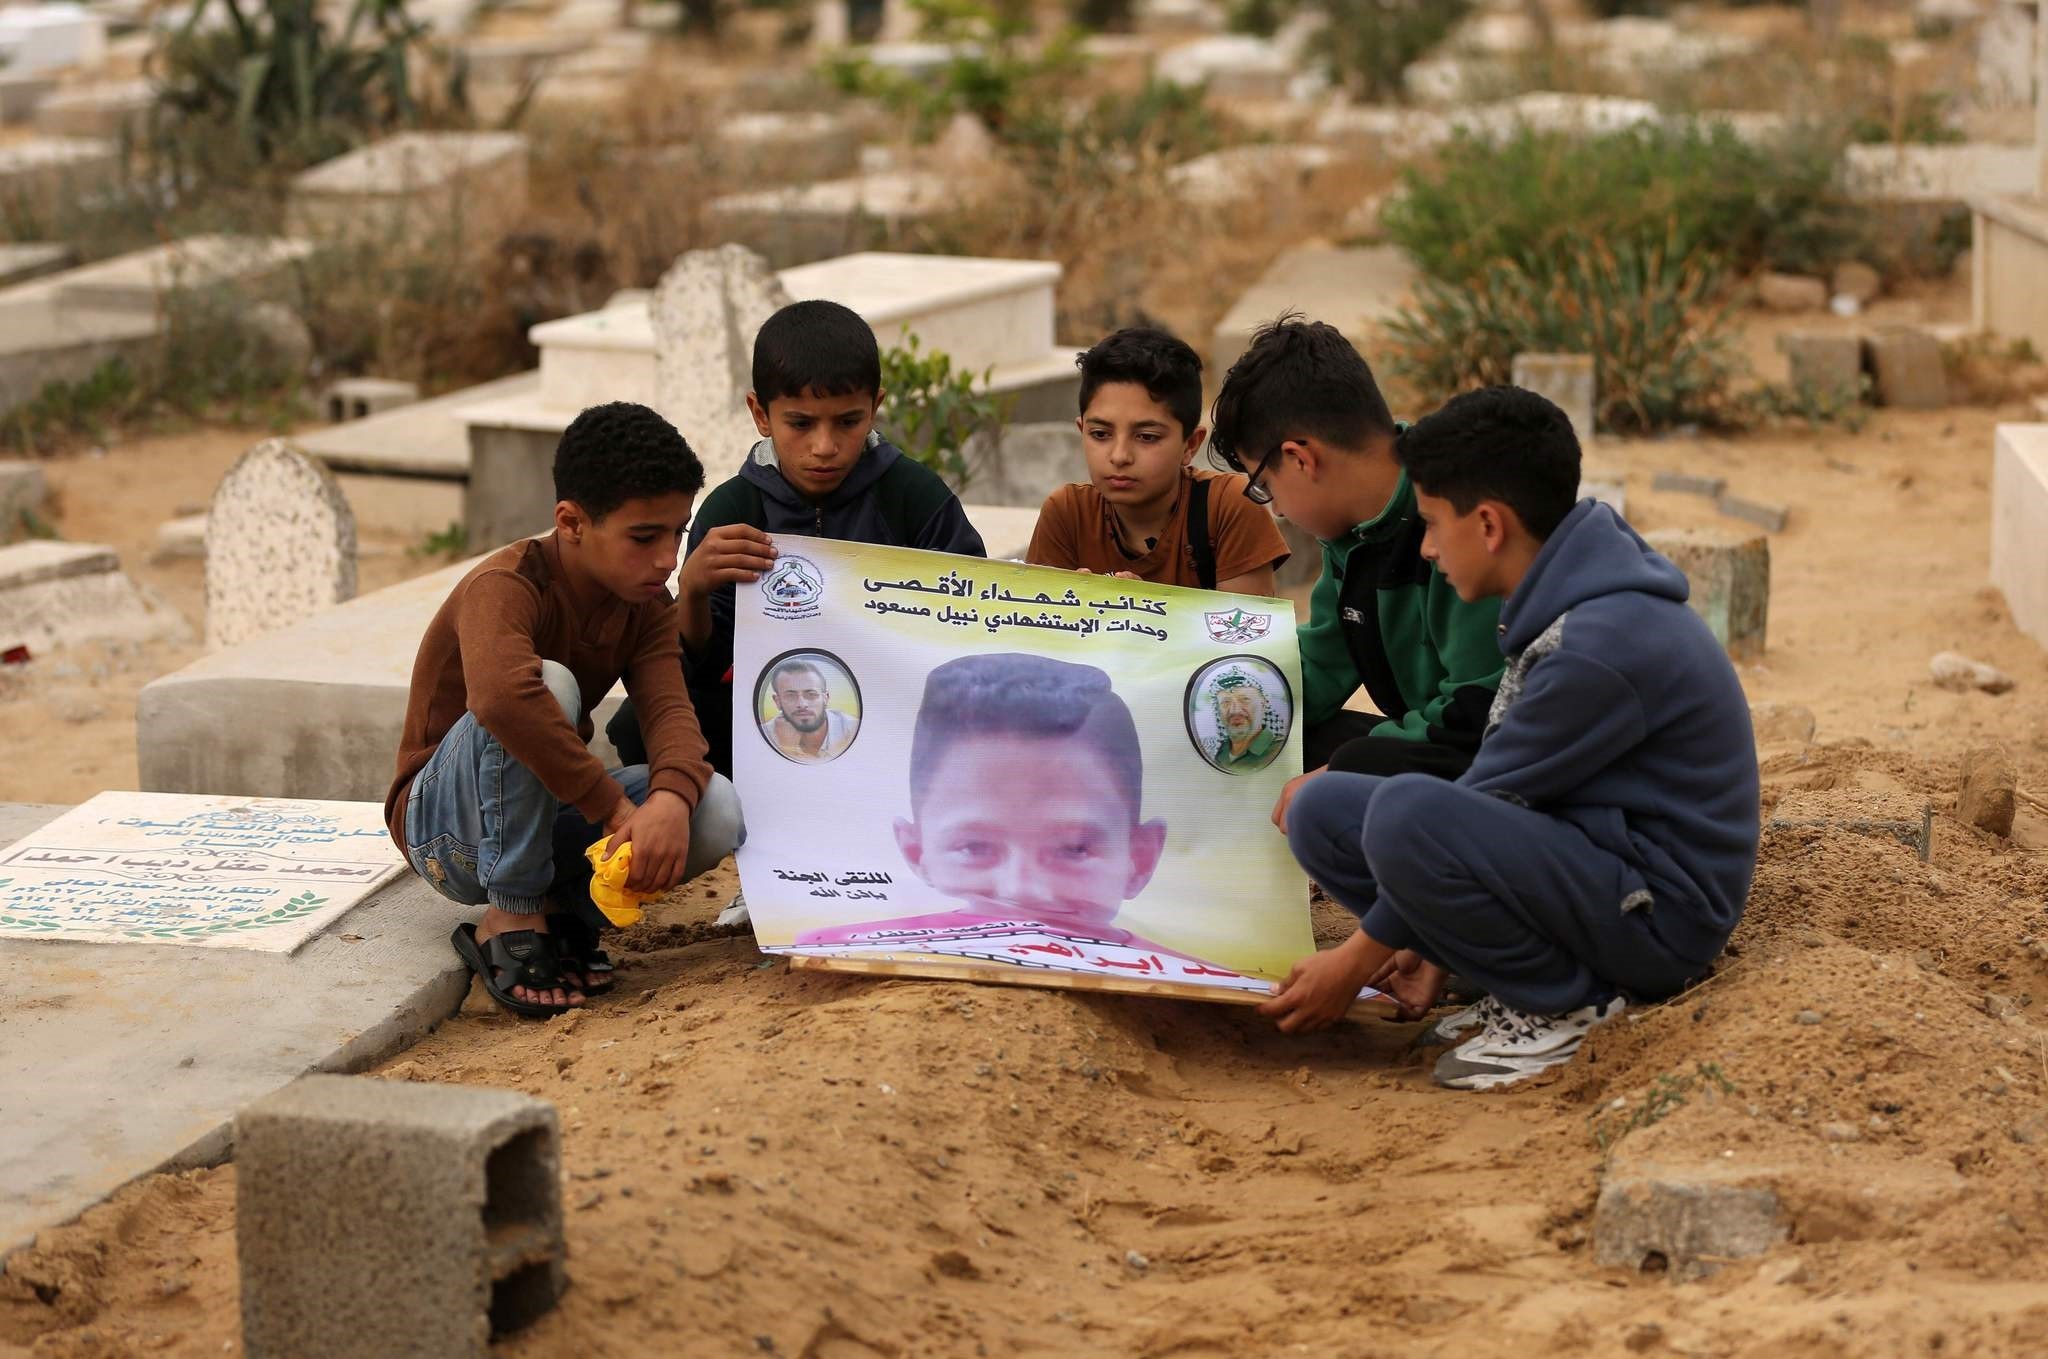 Friends of 15-year-old Palestinian Mohammed Ibrahim Ayoub, who was shot and killed by Israeli security forces during clashes along the Israel-Gaza border, hold up a poster of his portrait by his grave in a cemetery in Gaza. (AFP Photo)